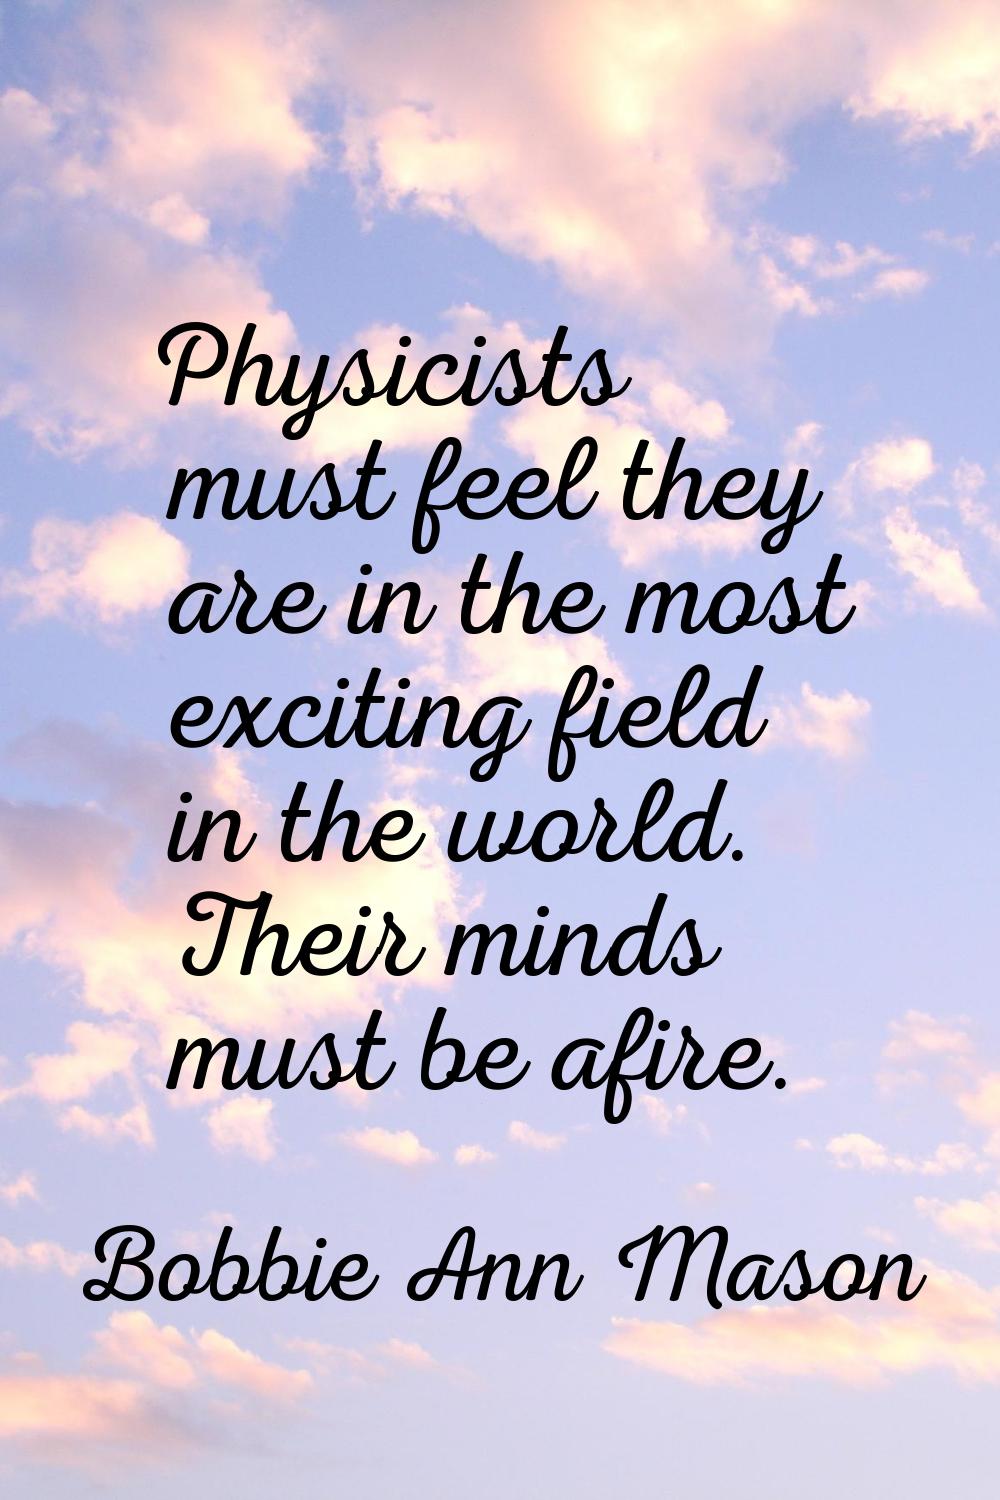 Physicists must feel they are in the most exciting field in the world. Their minds must be afire.